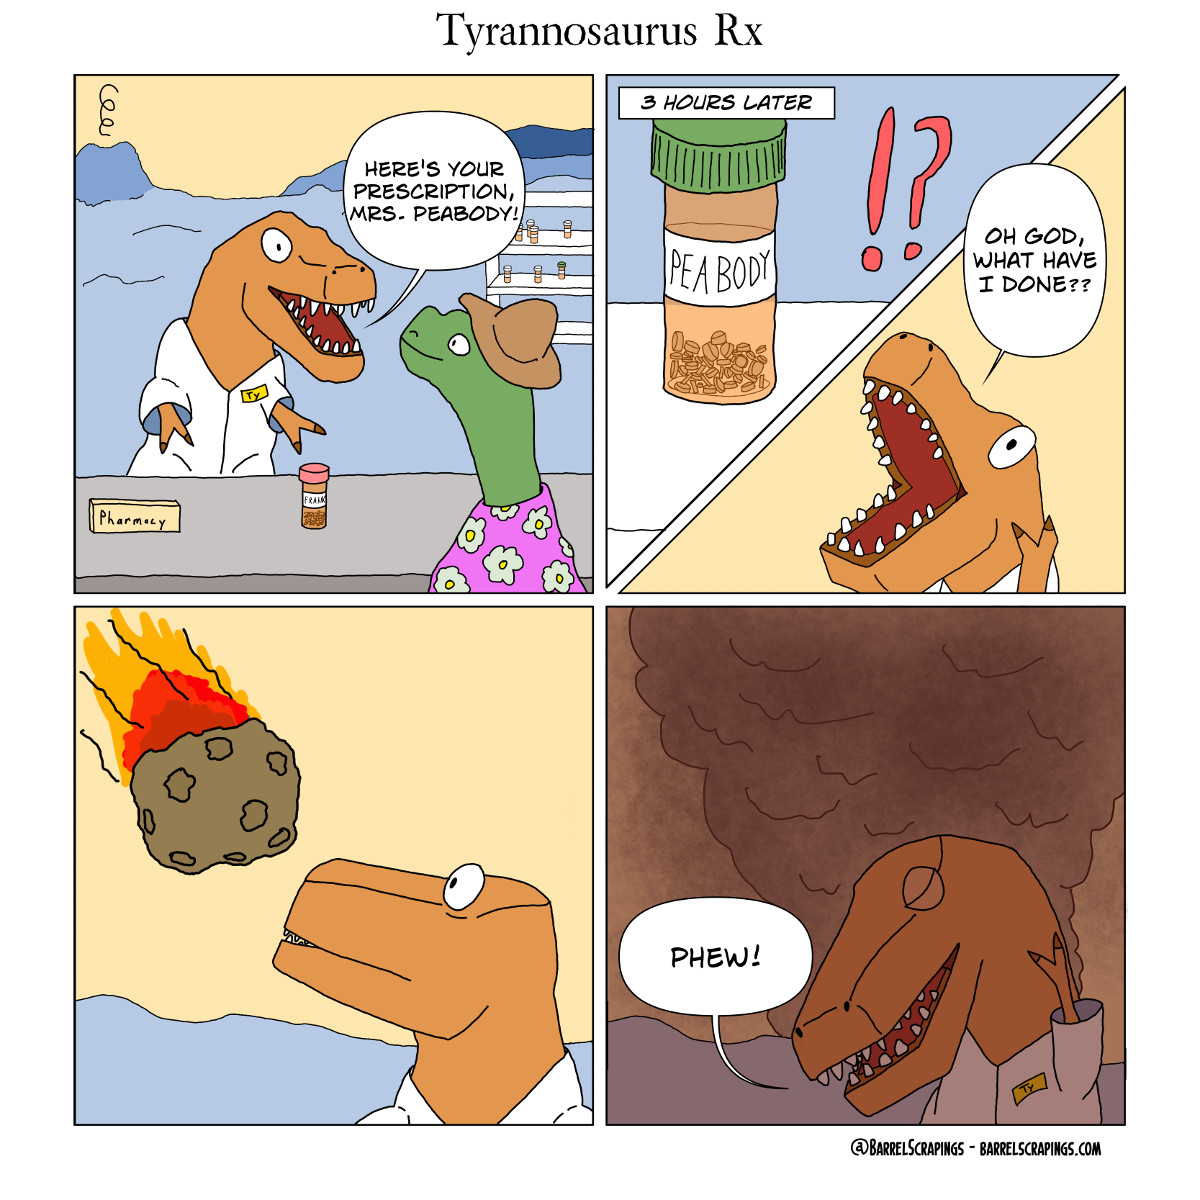 Panel 1: At a pharmacy. T-Rex with "Ty" nametag is serving a green dinosaur in flowered dress. He says, "Your prescription is ready, Mrs. Peabody!". The label on the prescription he hands her says Frank. Panel 2: 3 hours later, he finds Mrs. Peabody's prescription still on the shelf. He shouts, "Oh god, what have I done?" Panel 3: He sees a meteor hurtling towards earth. Panel 4: The sky is filled with smoke and the end is nigh. He wipes his brow and says, "Phew"